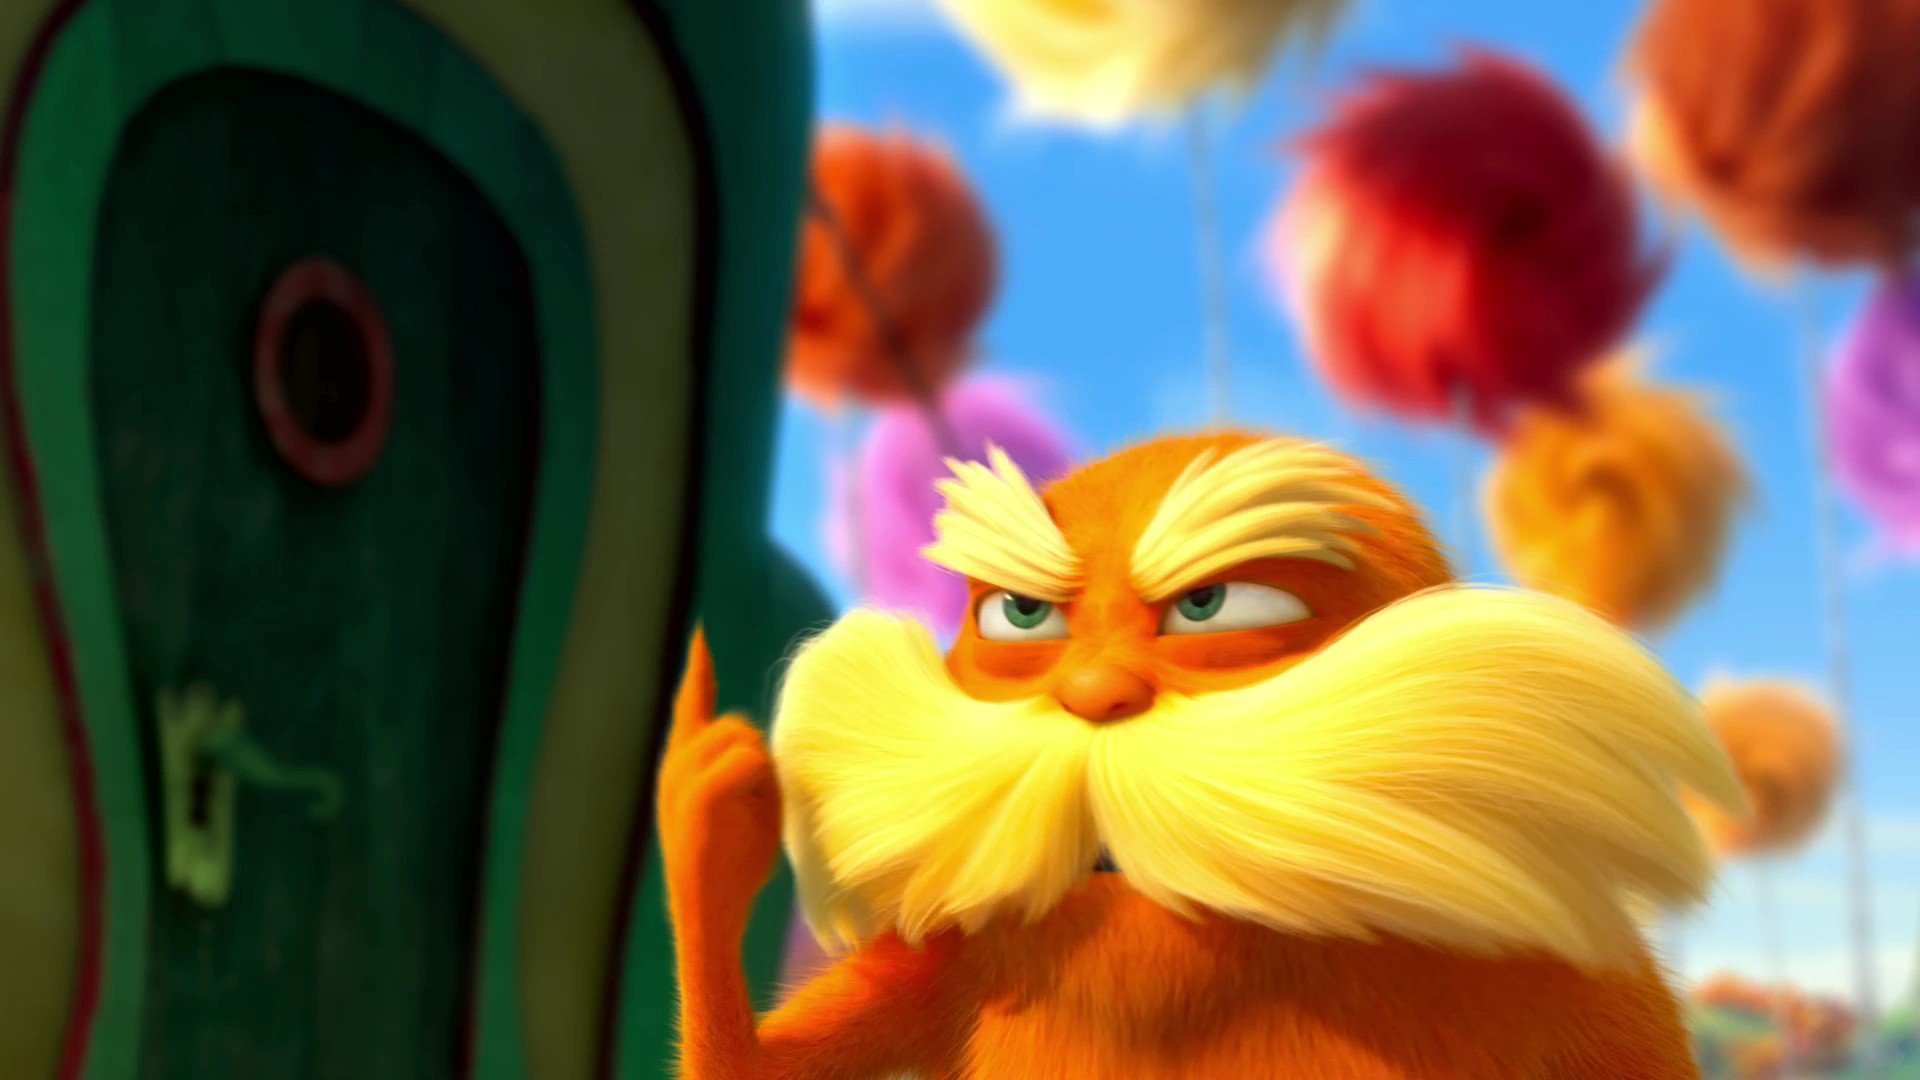 cartoons, The, Lorax Wallpapers HD / Desktop and Mobile Backgrounds.